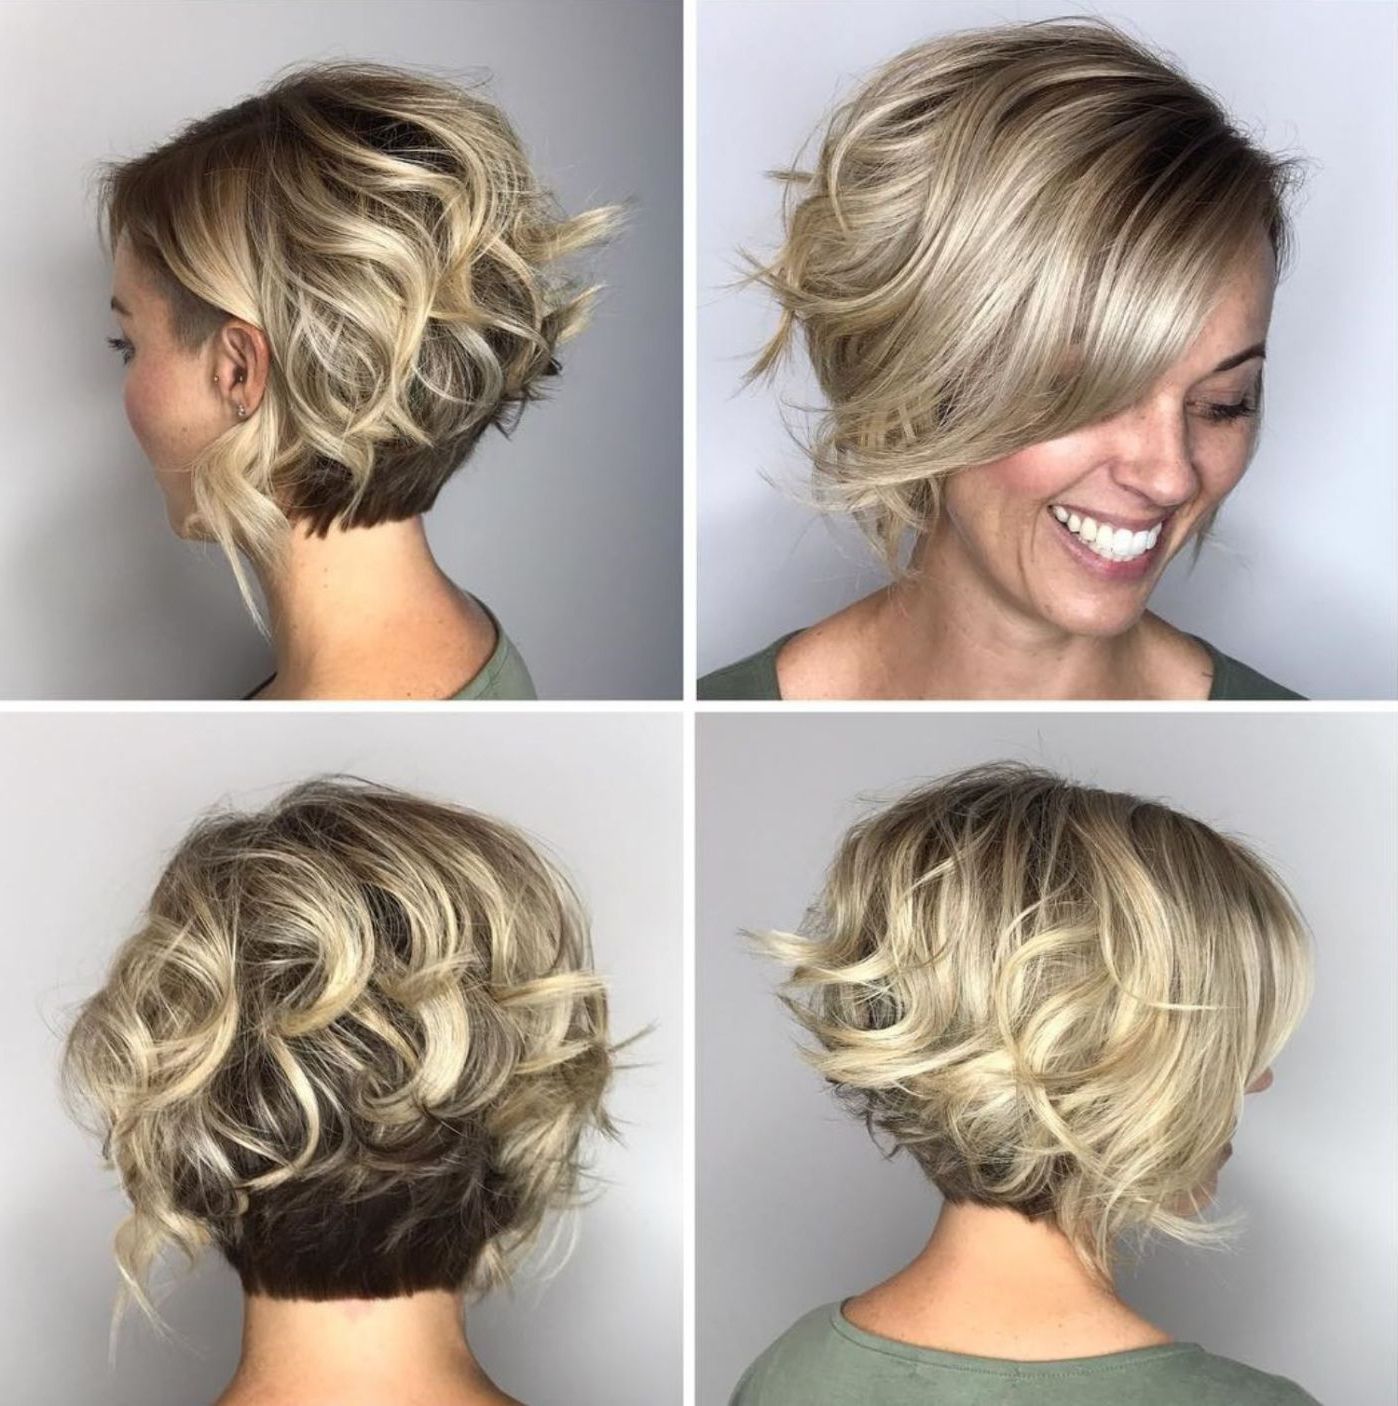 100 Mind Blowing Short Hairstyles For Fine Hair In 2018 | All Hair Pertaining To Nape Length Curly Balayage Bob Hairstyles (View 23 of 25)